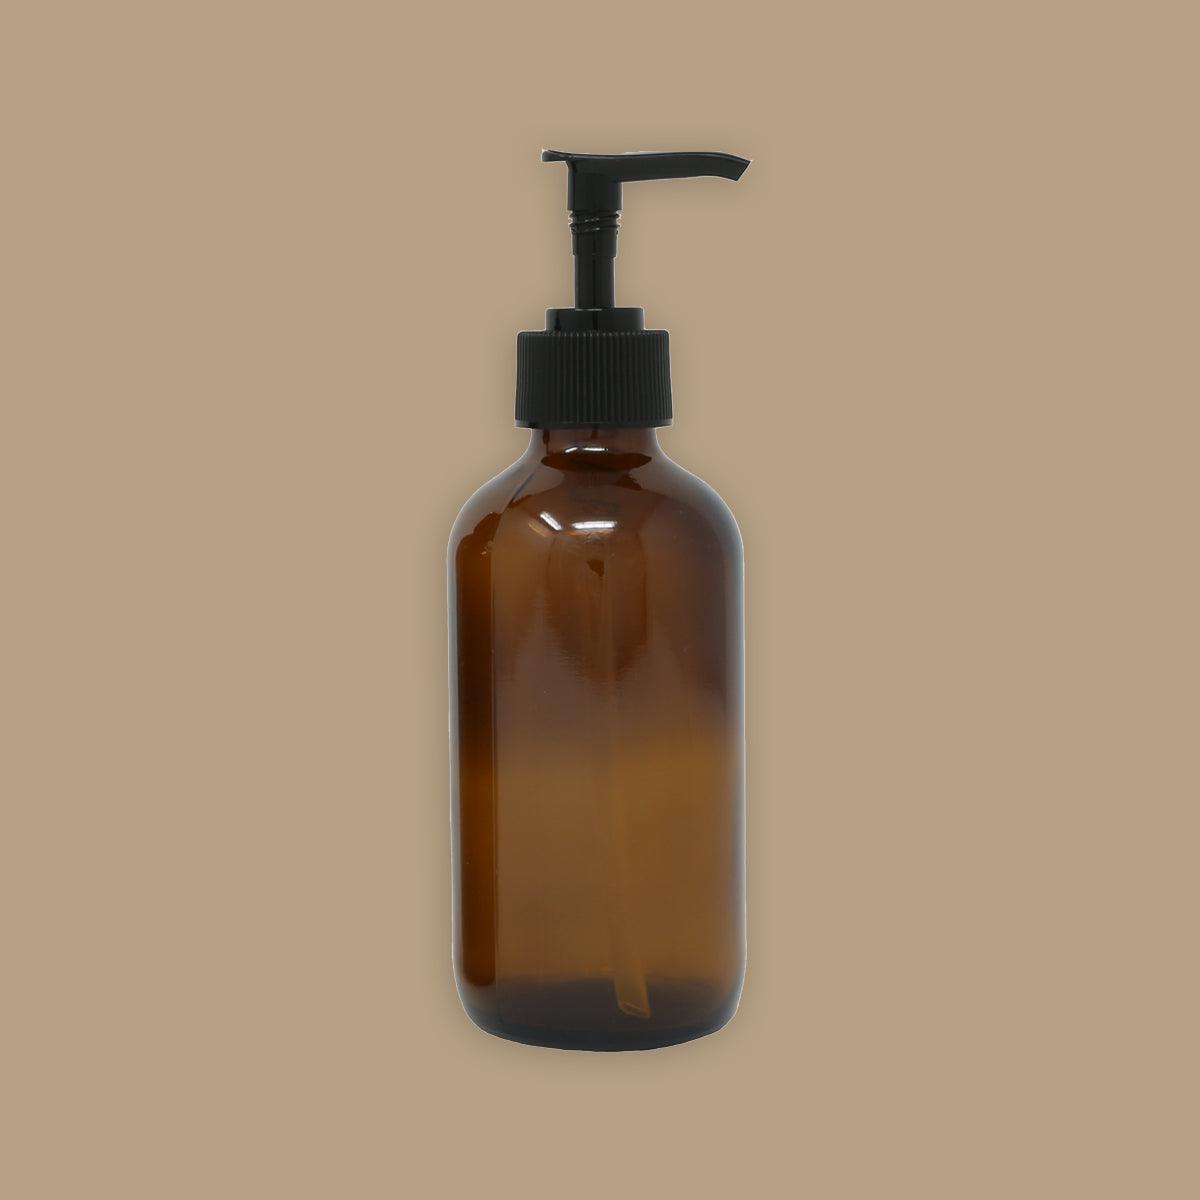 240ml amber glass bottle with black lotion pump - local - letsbelocal.ca